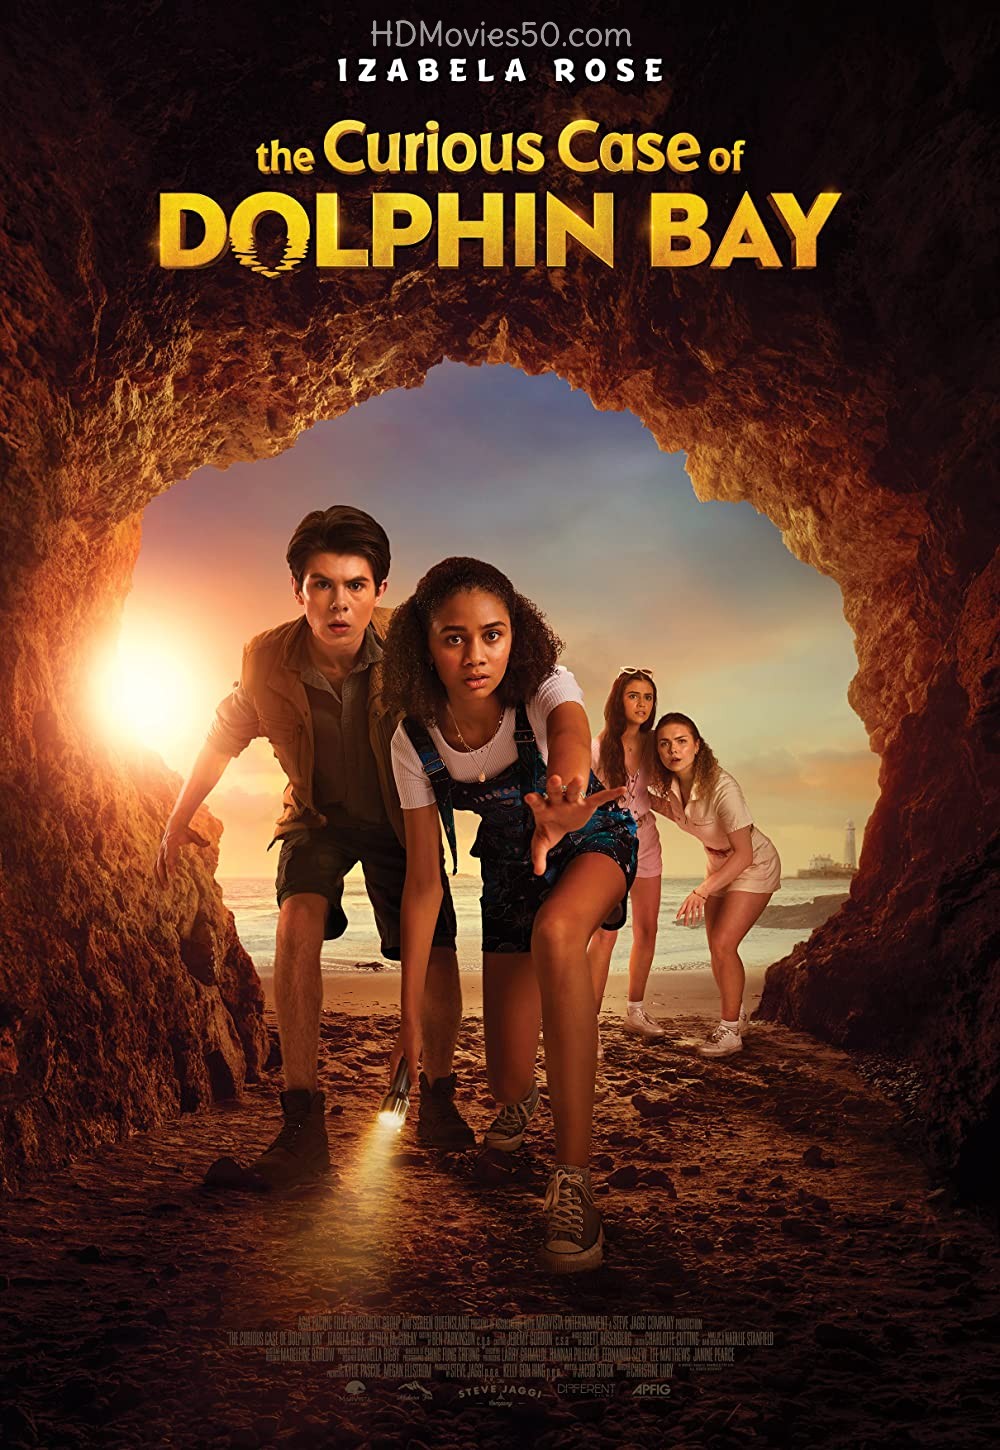 The Curious Case of Dolphin Bay 2022 English Movie 480p HDRip 350MB Download